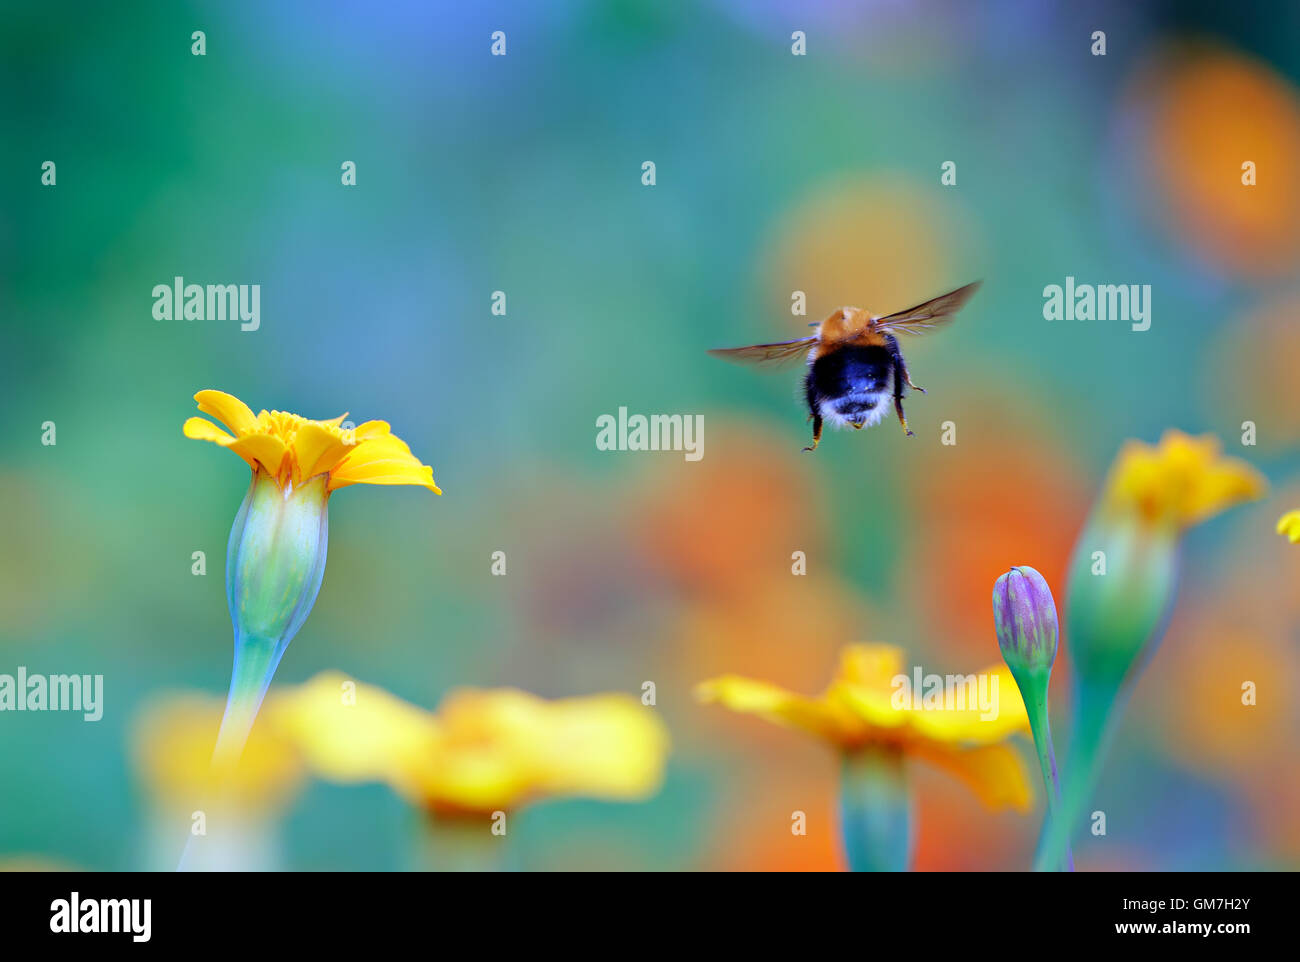 Flight of a Bumble Bee Stock Photo